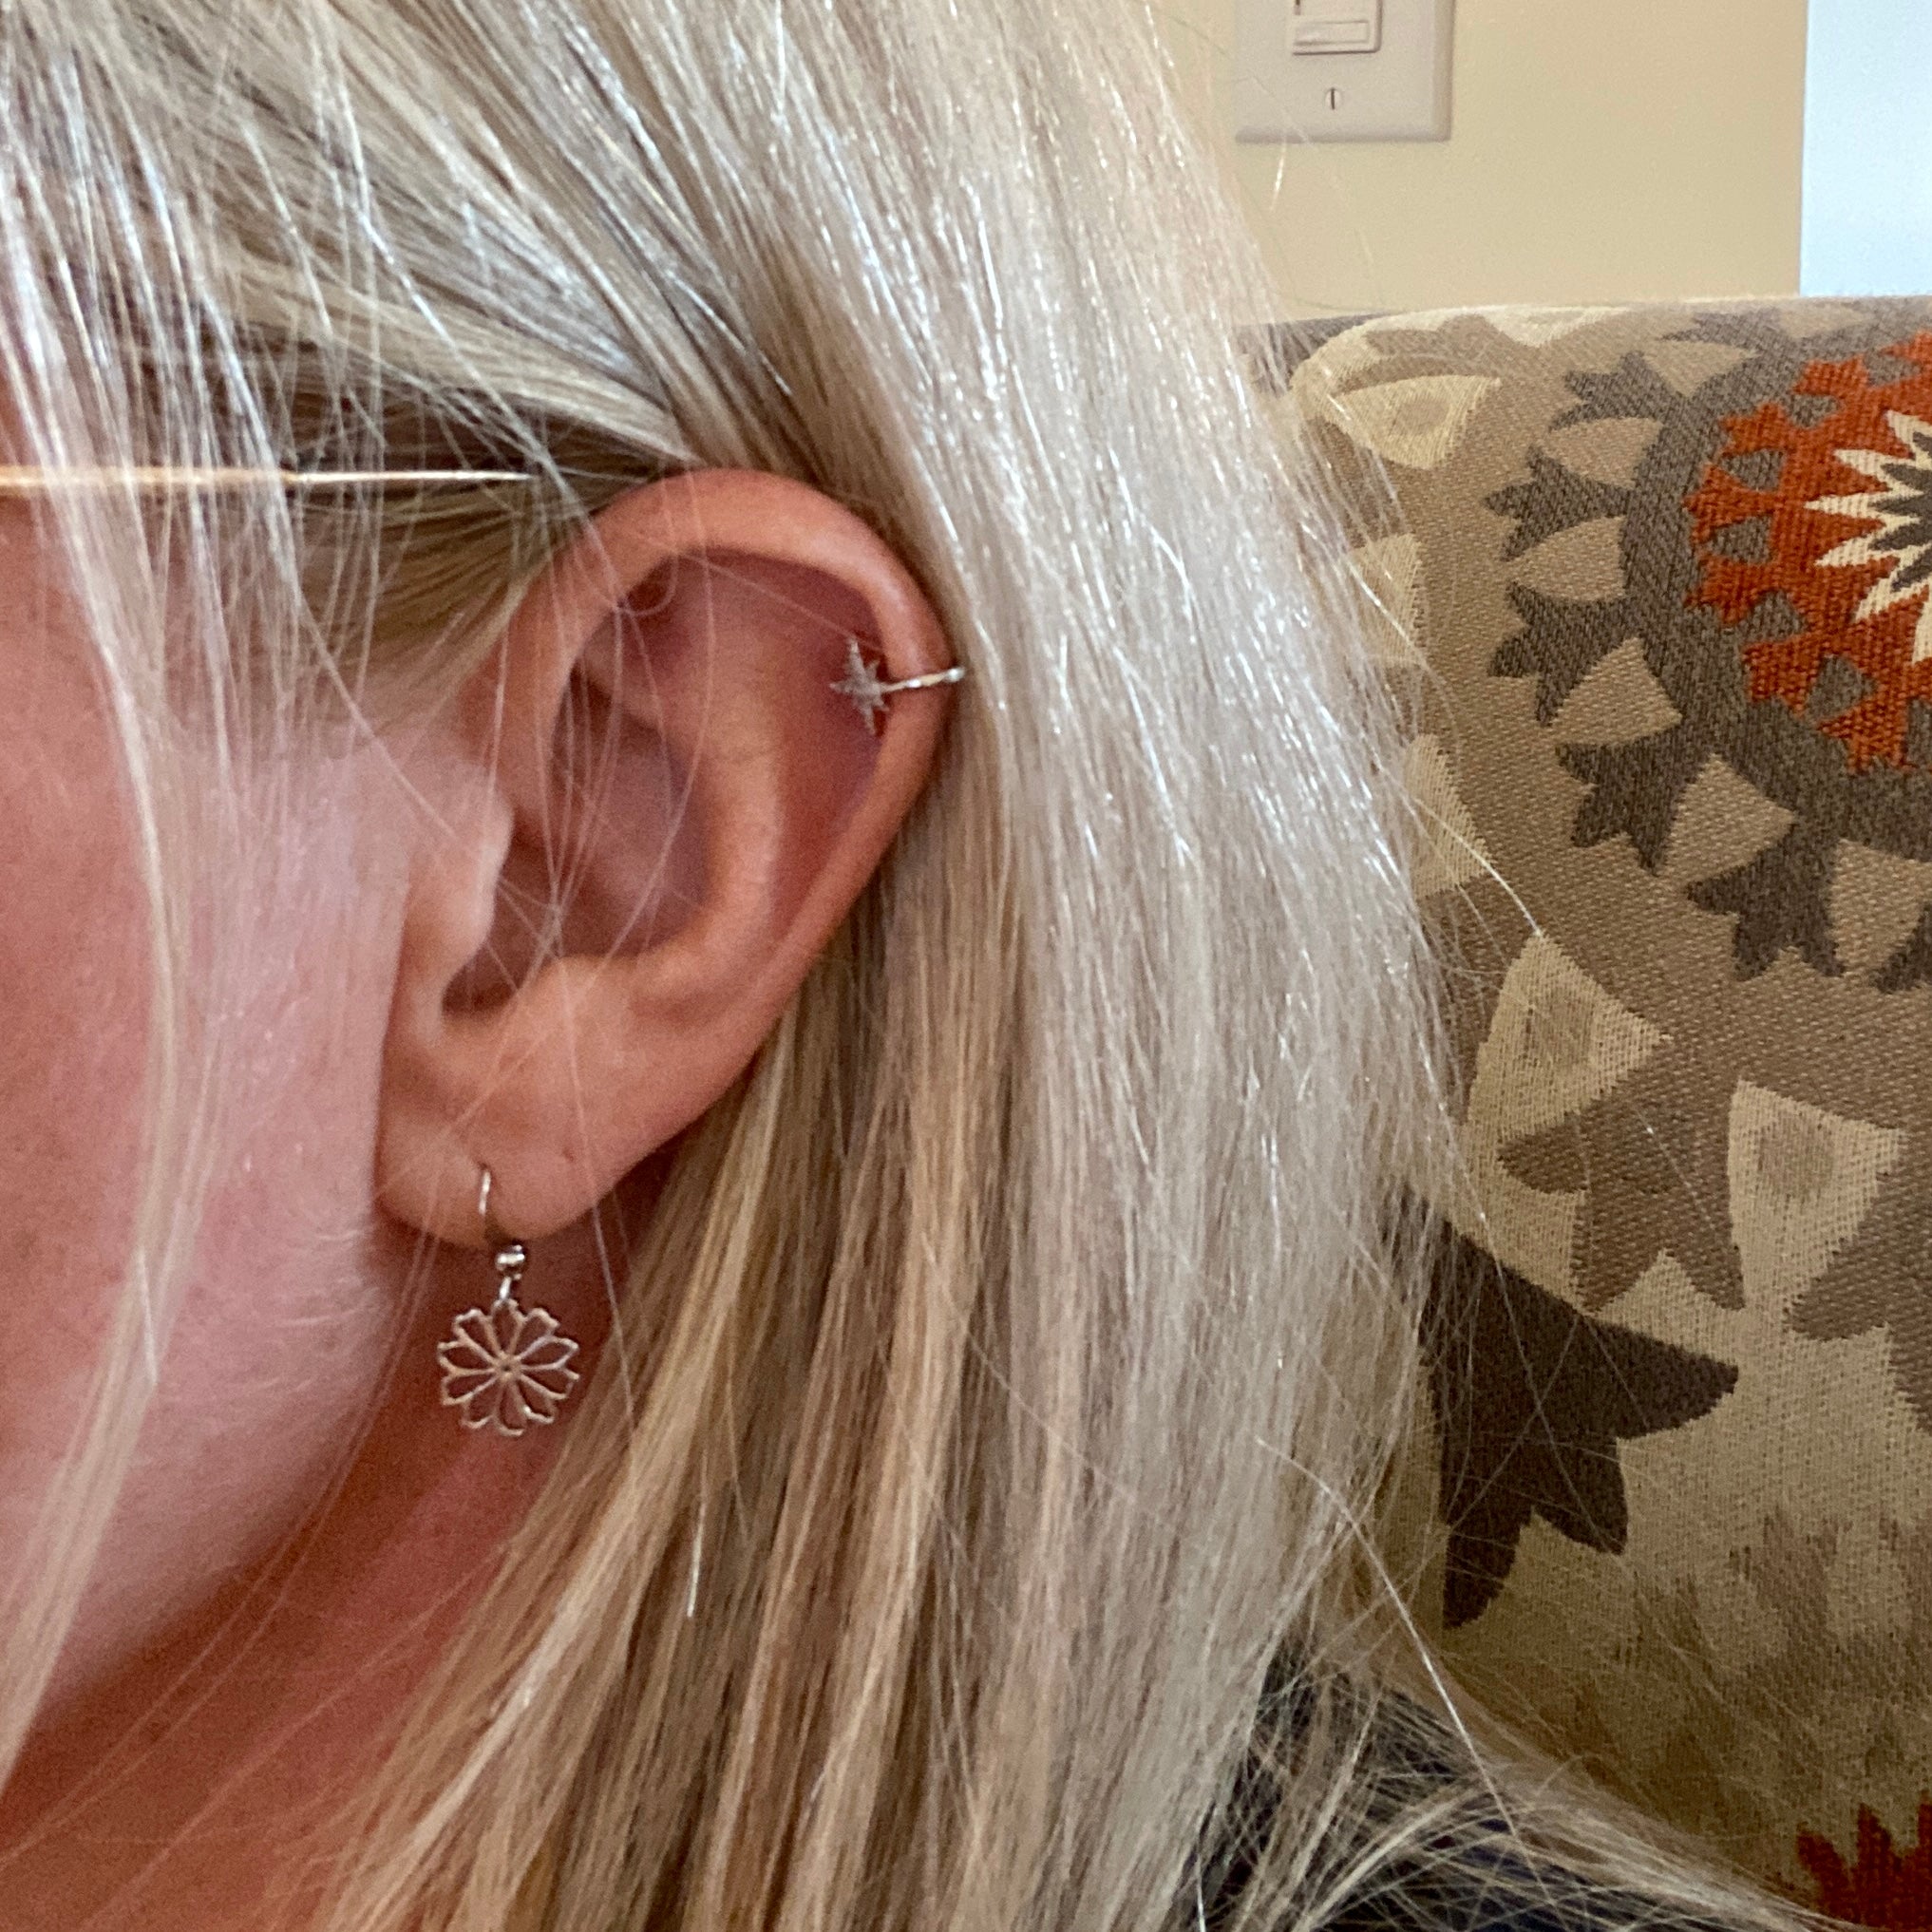 NEW Ear cuffs - no piercings required